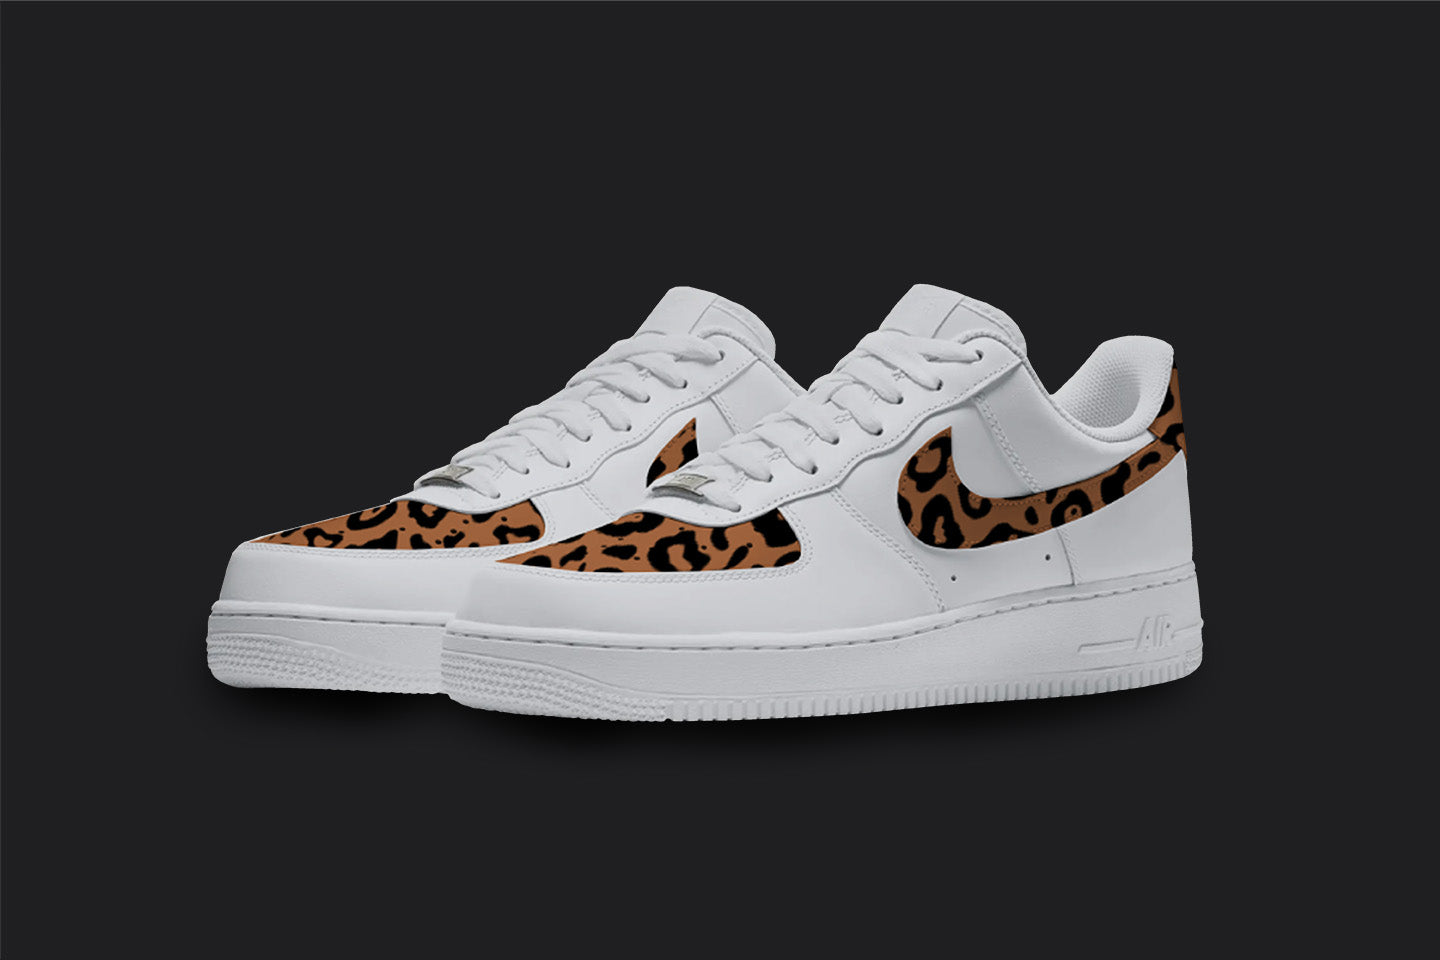 The image is of a Custom Nike Air force 1 sneaker pair on a blank black background. The white custom sneakers have a Cheetah print in the front and on the nike logos. 